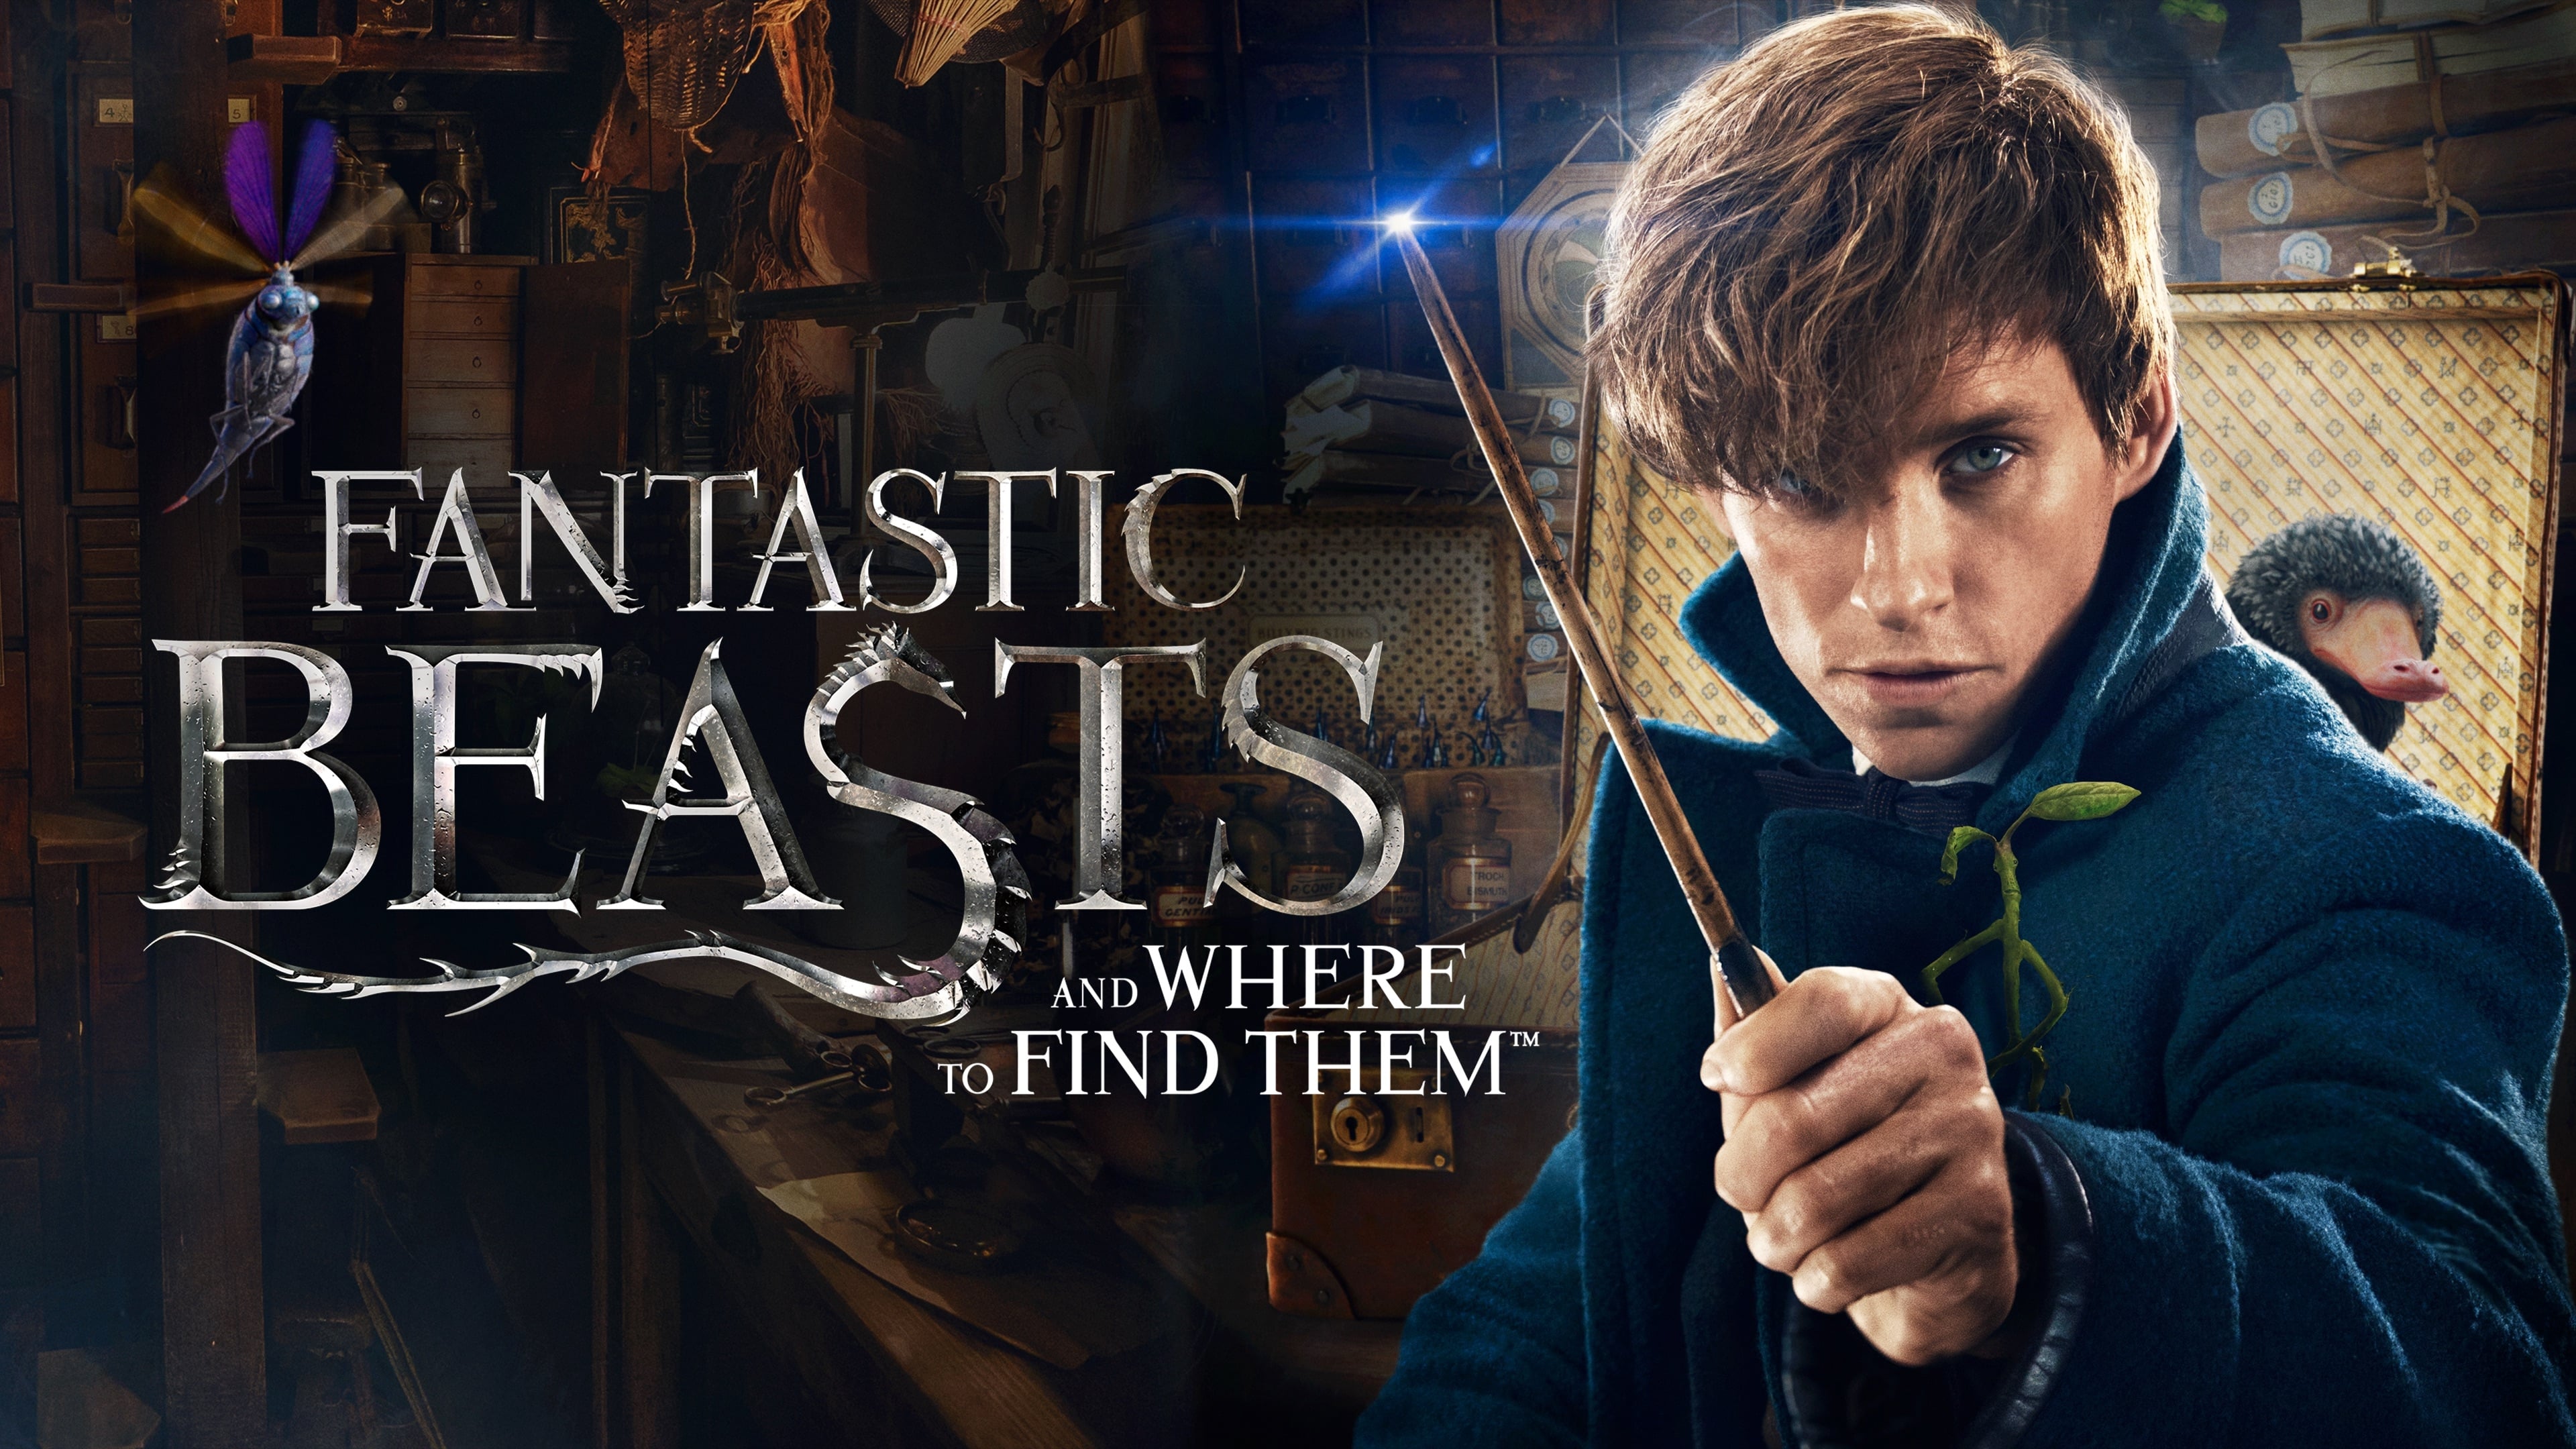 Movie Fantastic Beasts and Where to Find Them 4k Ultra HD Wallpaper